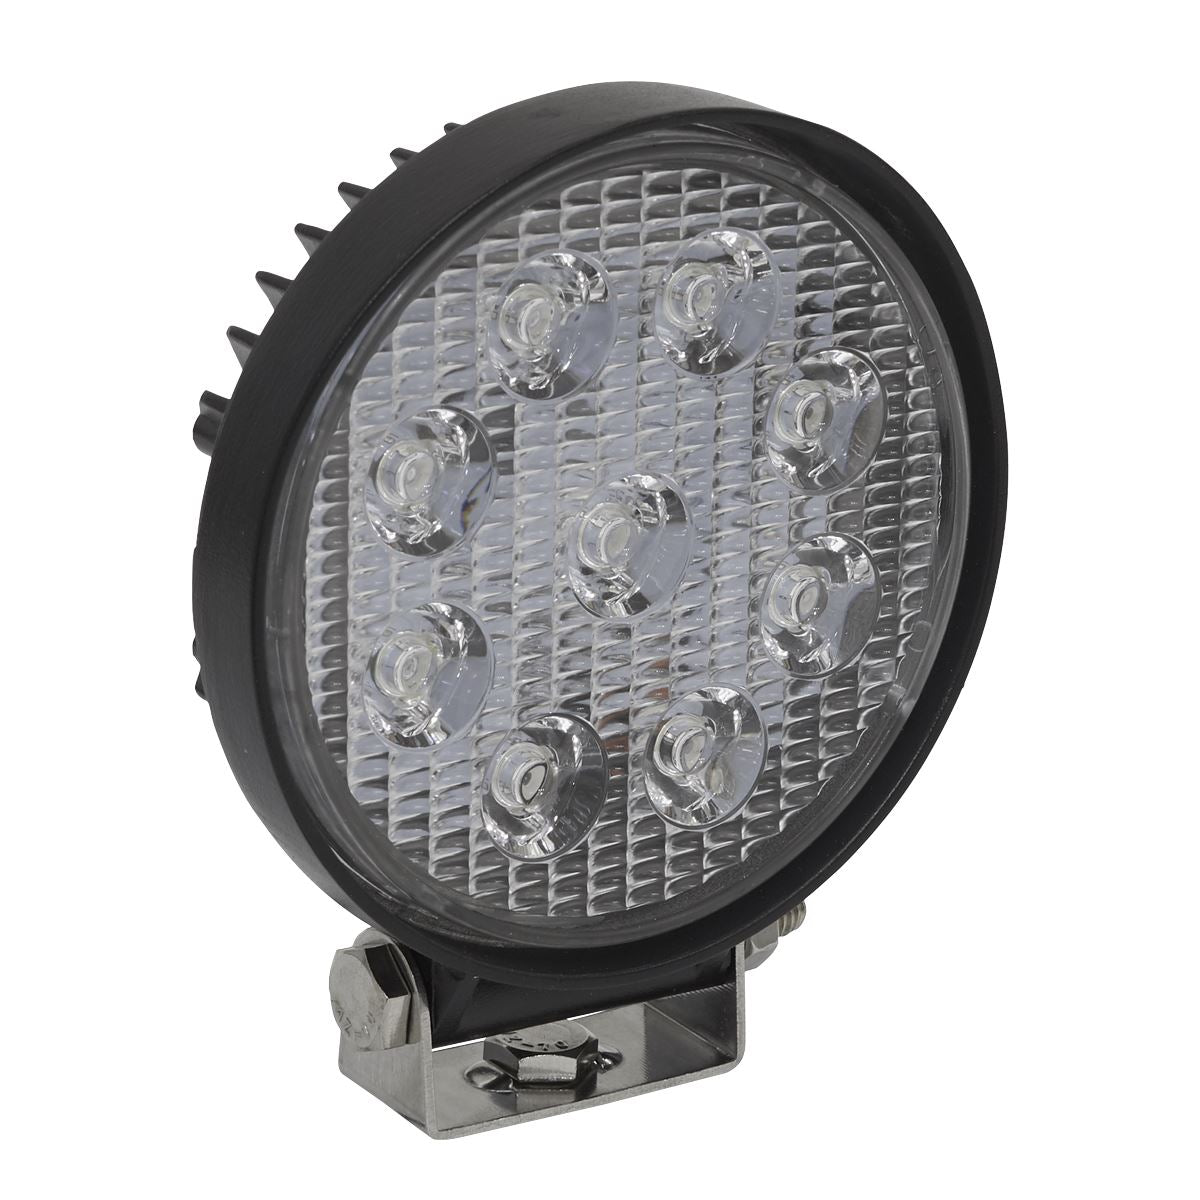 Sealey Round Worklight with Mounting Bracket 27W SMD LED